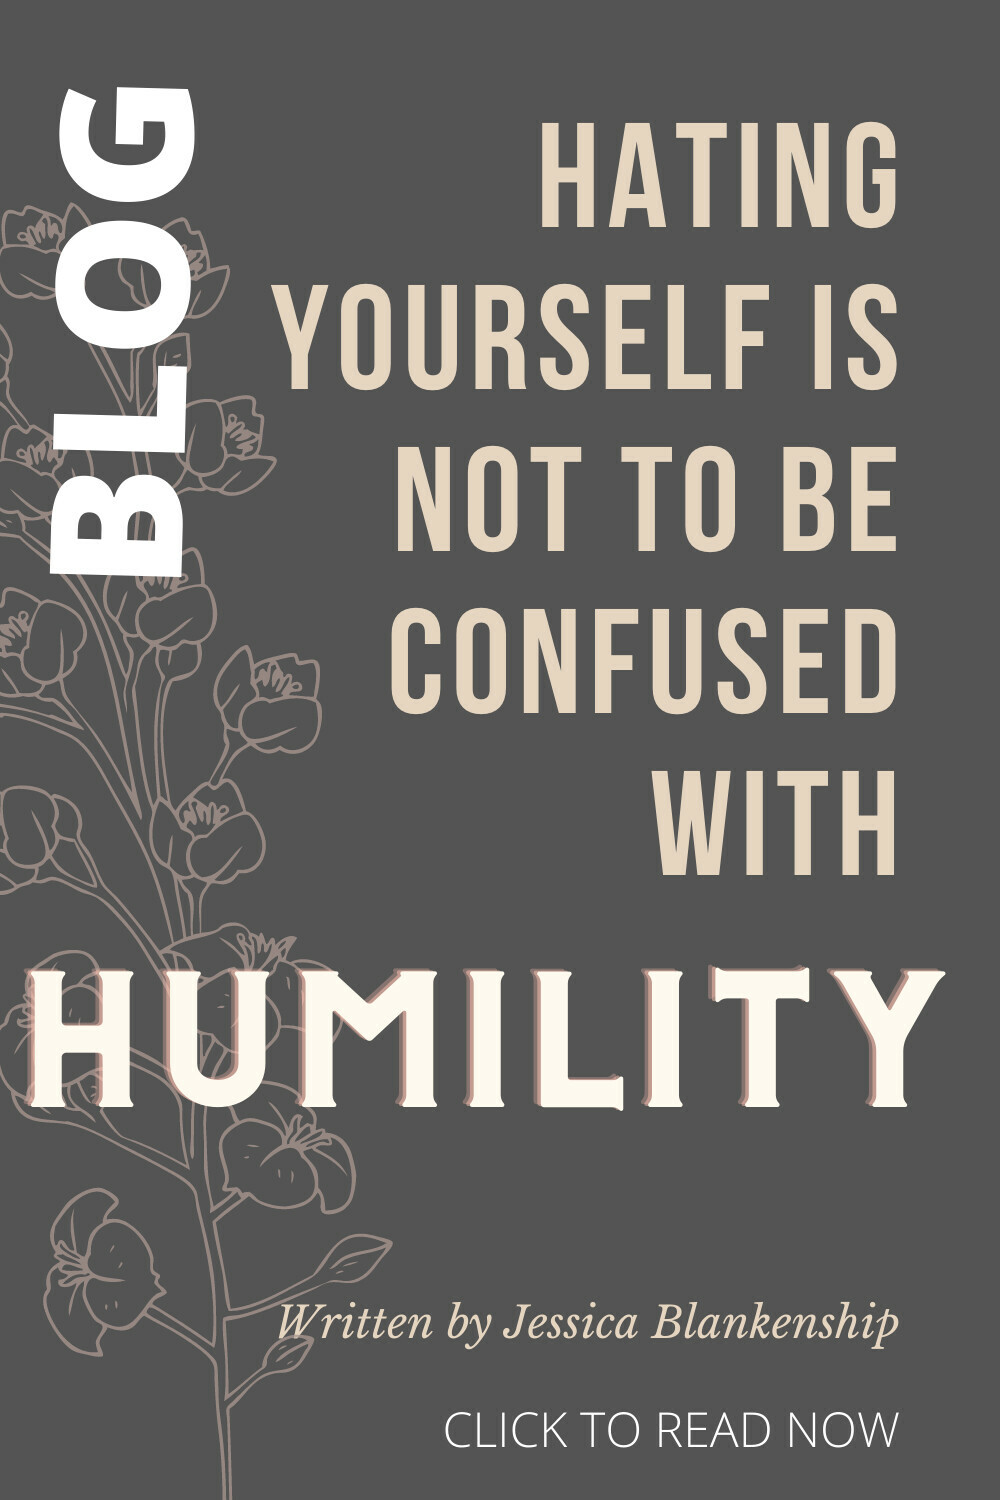 Hating Yourself Is Not to Be Confused with Humility